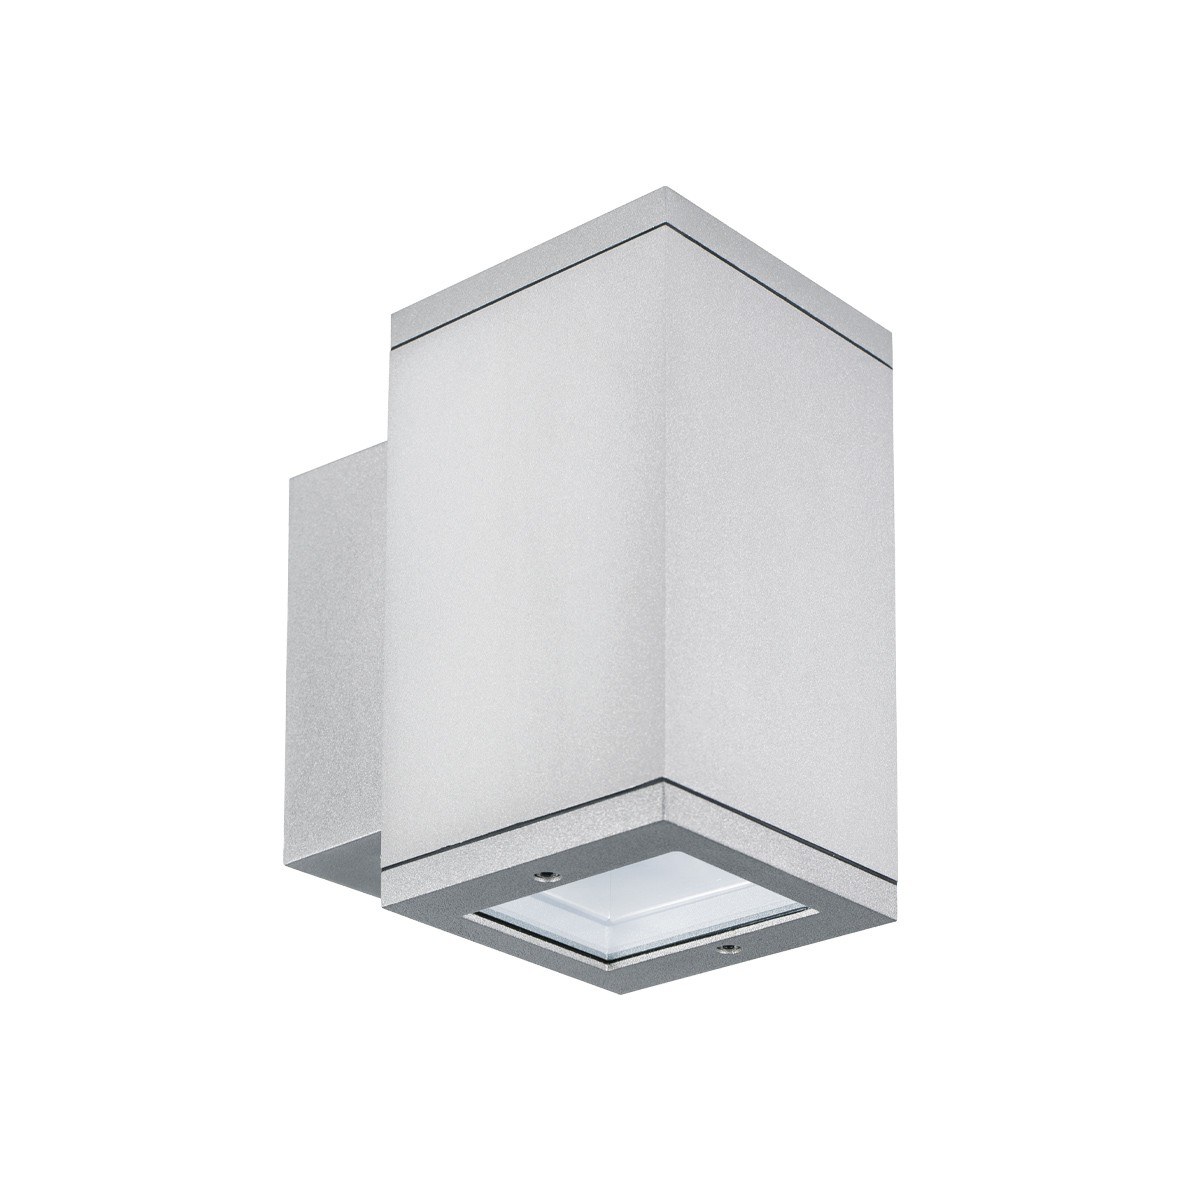 AVERY – LED WALL LAMPLED SQUARED 15,6W 4K GR